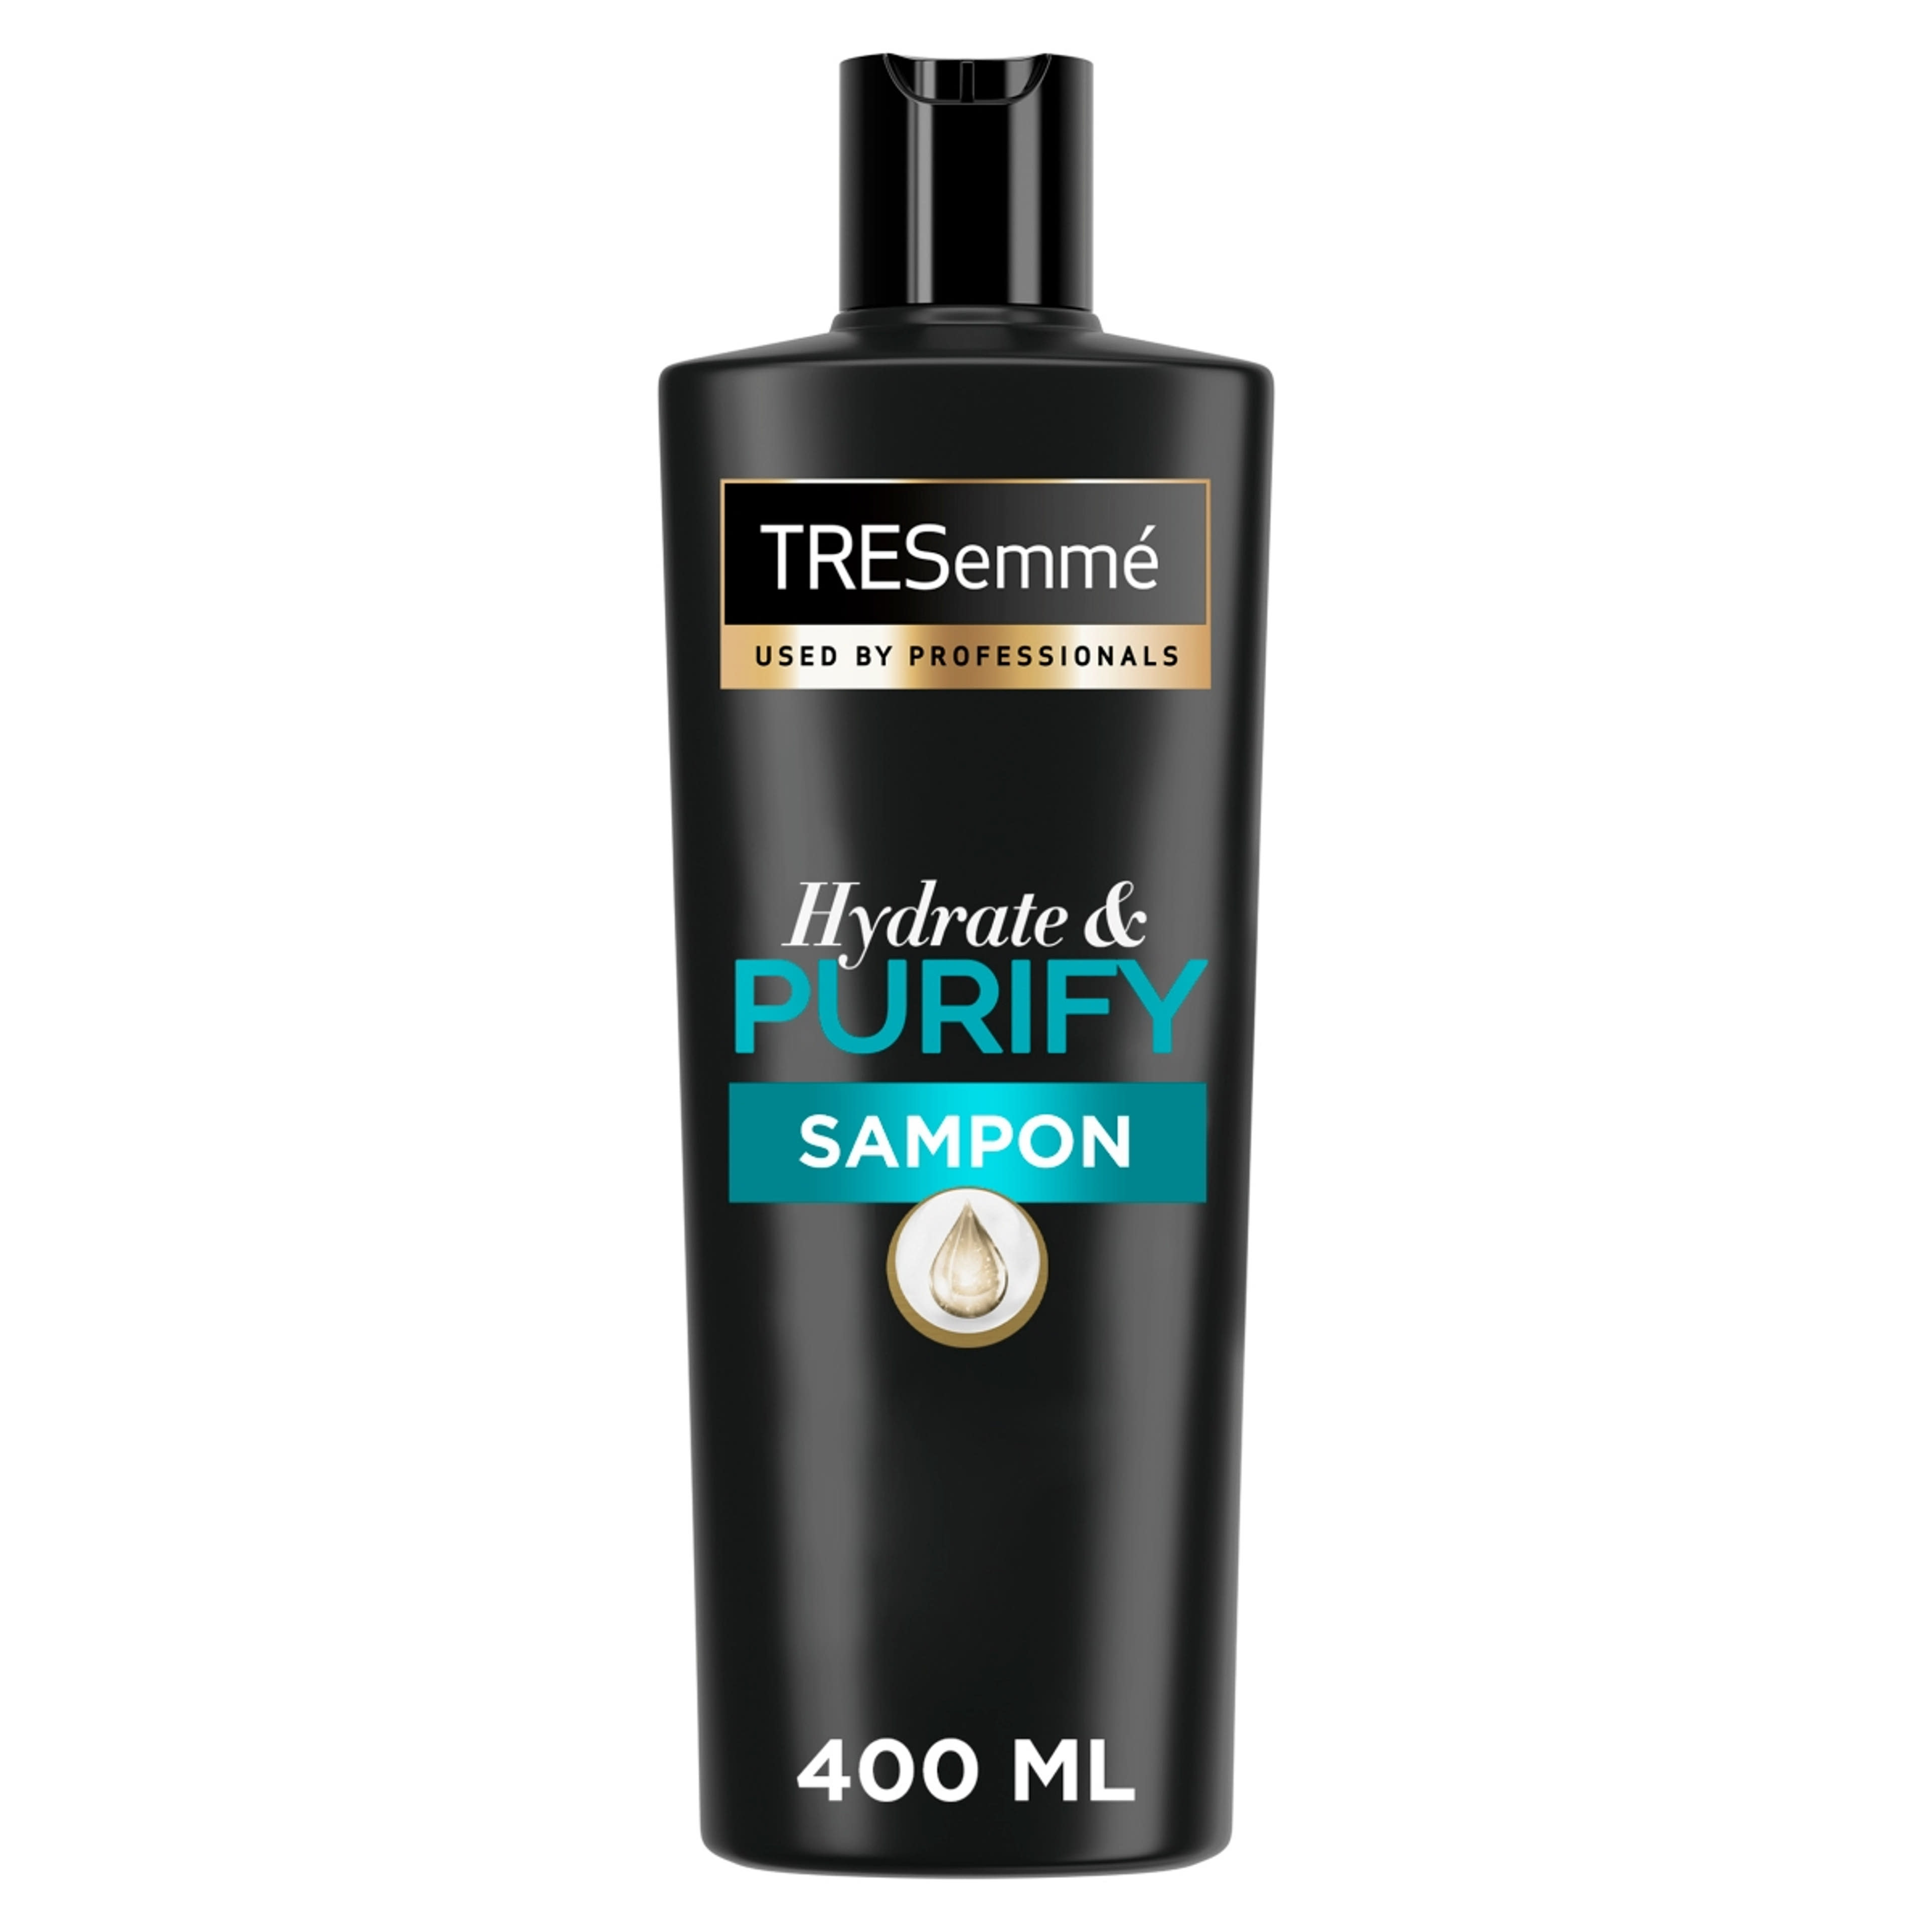 Tresemme purify & hydrate sampon - 400 ml-2